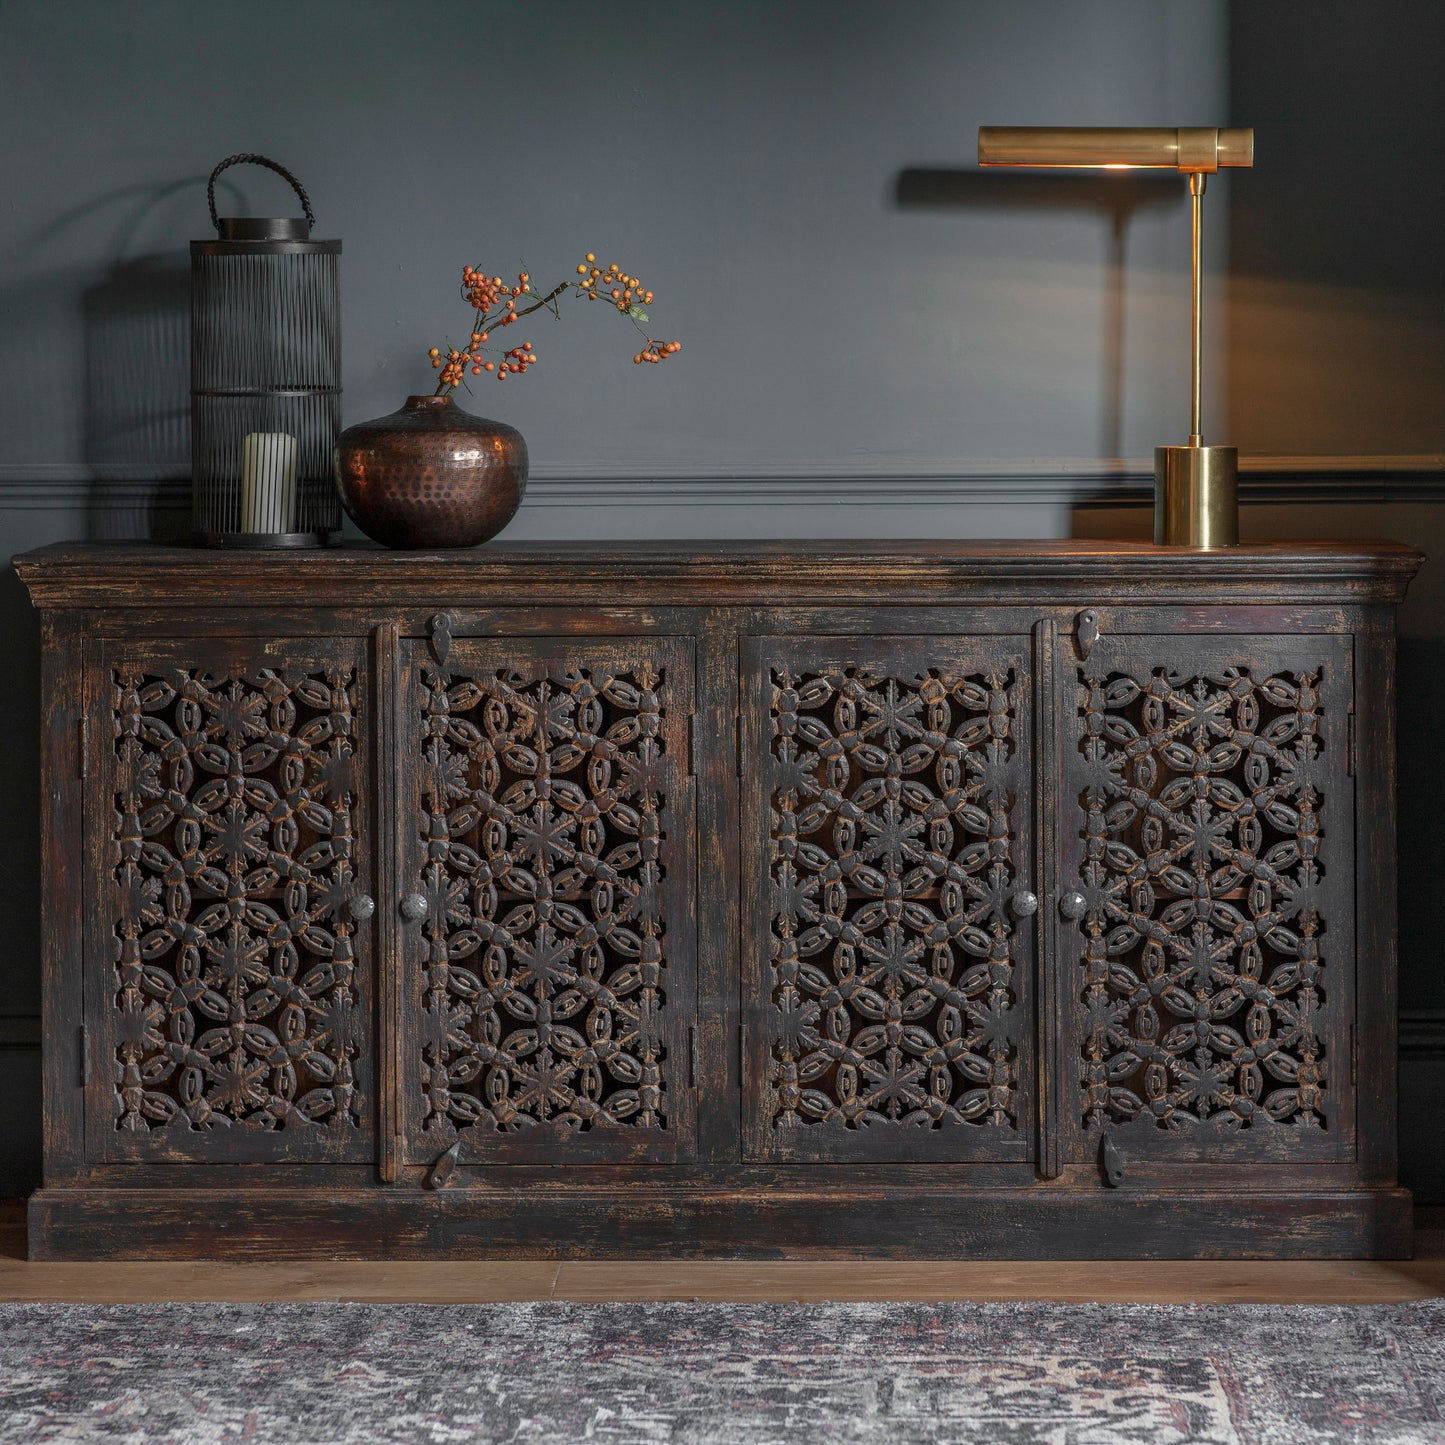 An ornate home furniture piece, the Chillington 4 Door Sideboard 1800x410x900mm by Kikiathome.co.uk, adds elegance to interior decor in a dark room